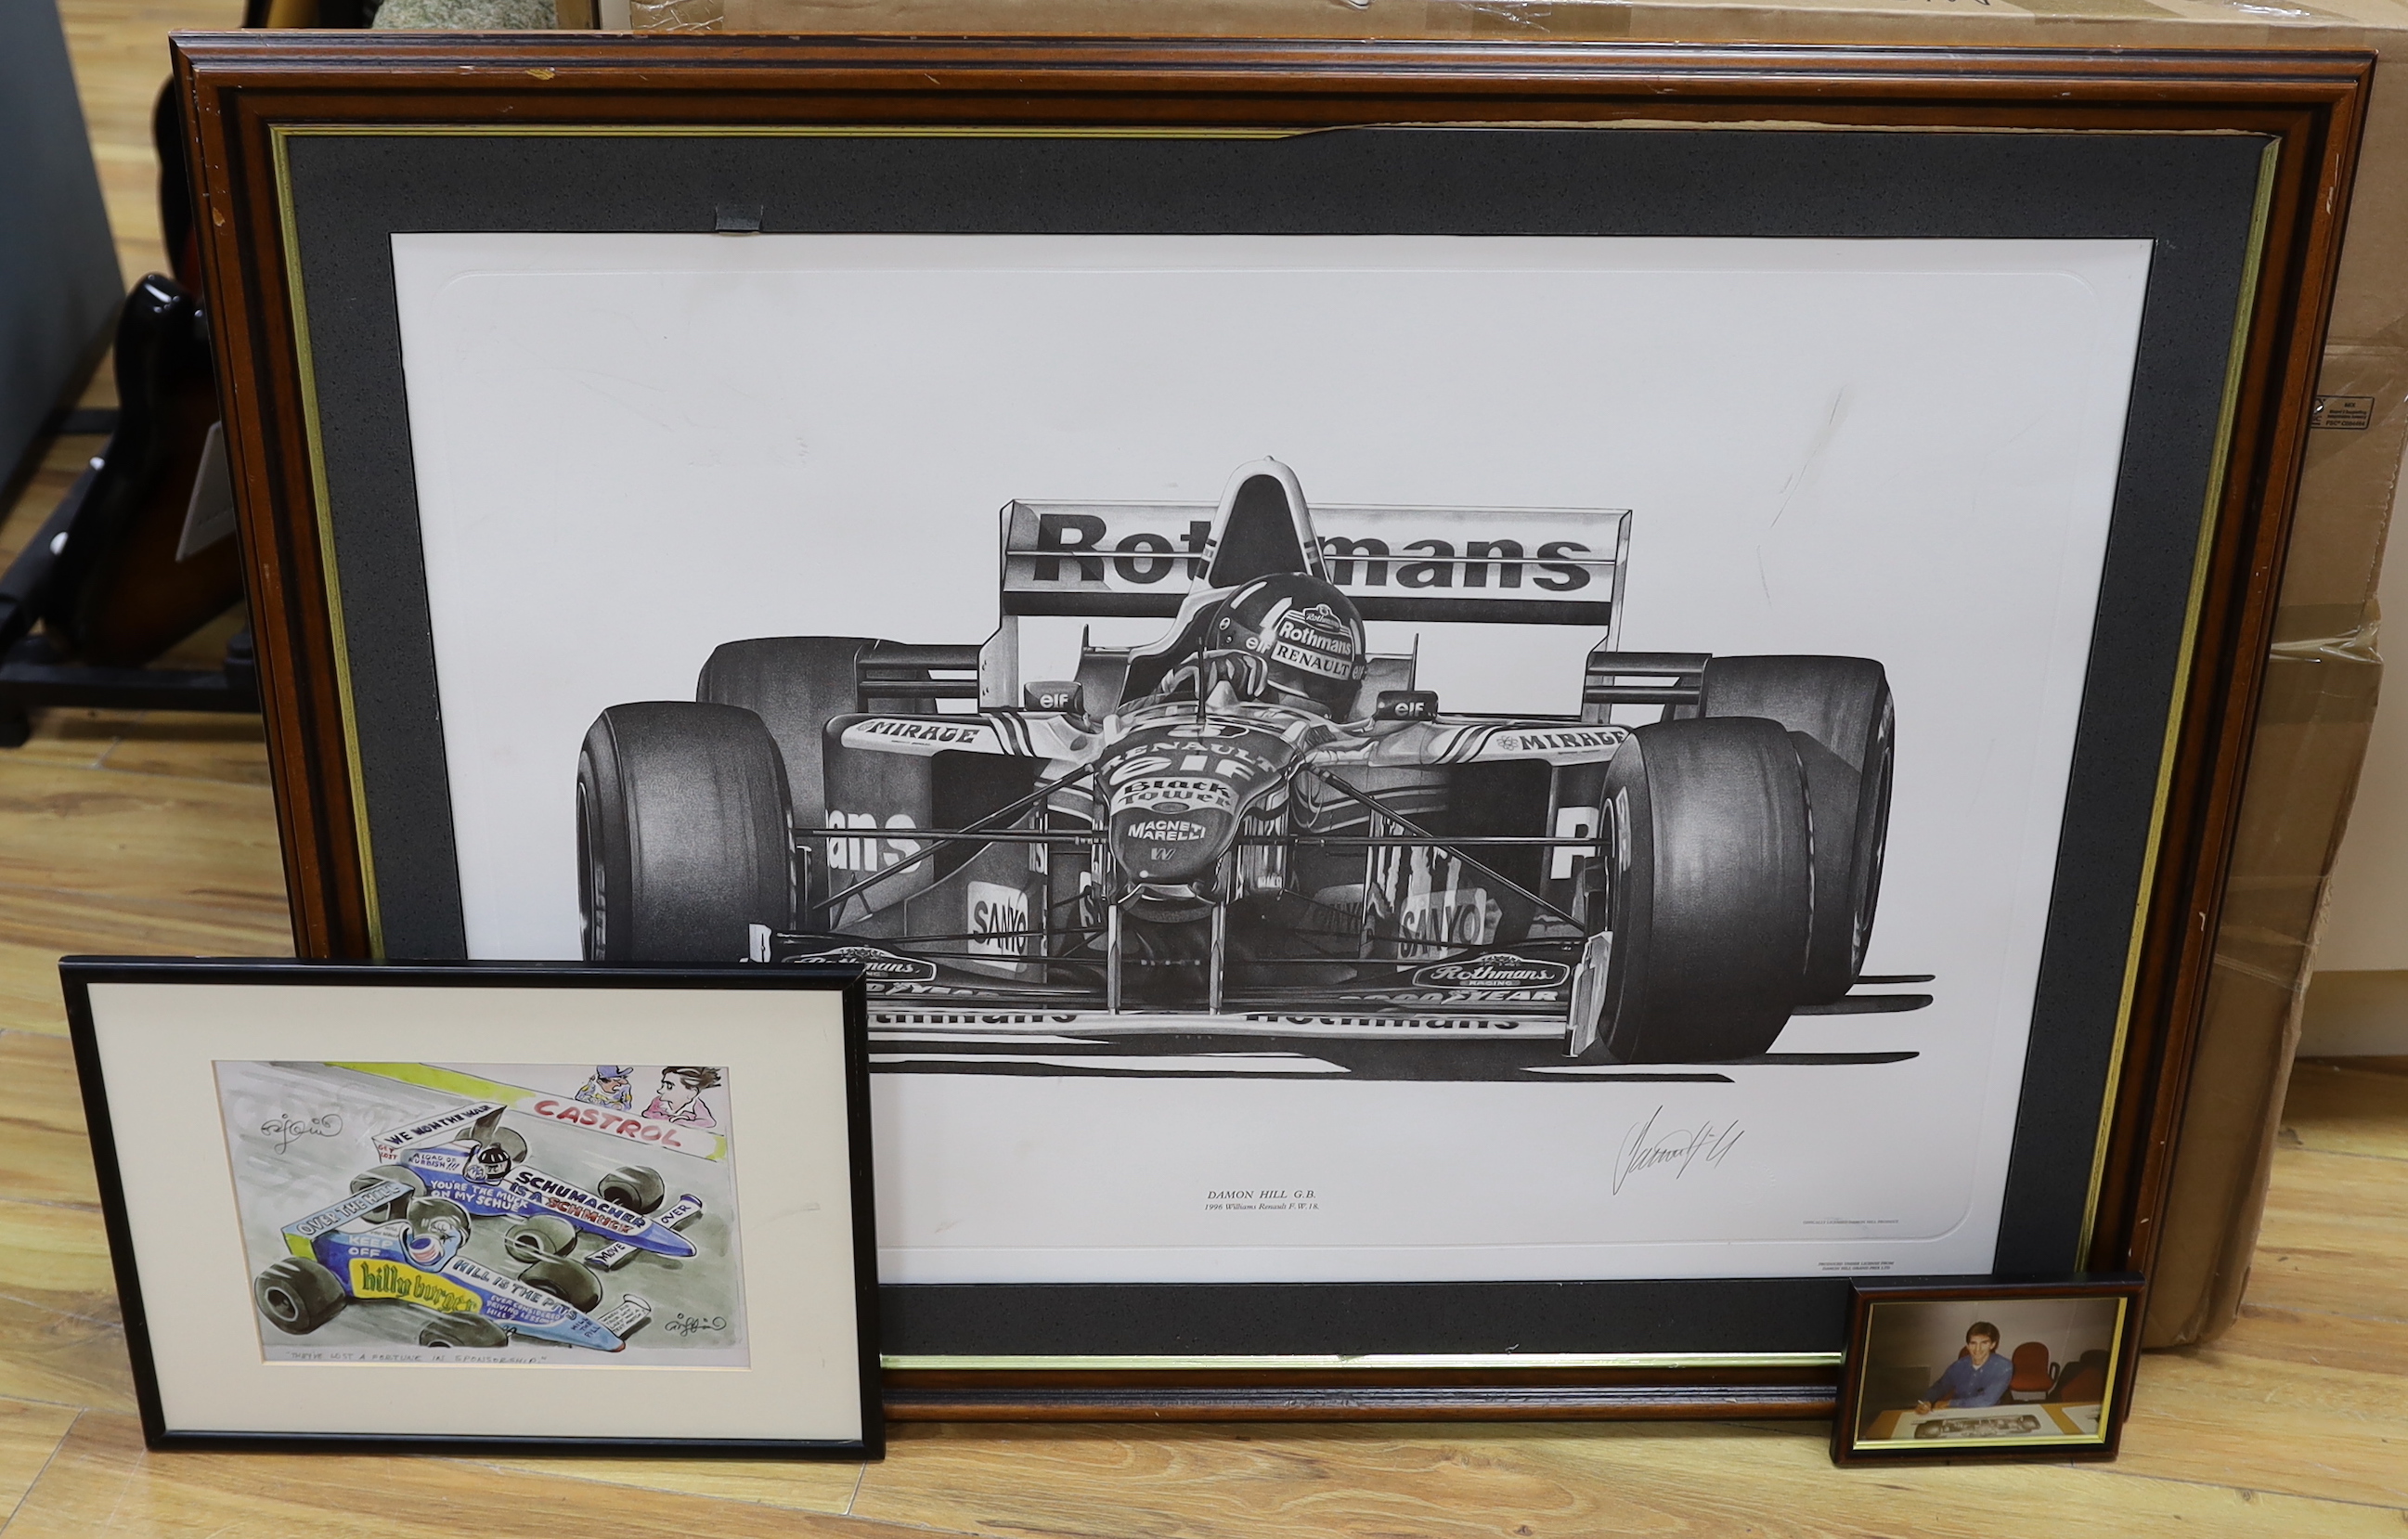 Alan Stammers (20th. C), pencil signed limited edition print, 1996 Damien Hill, Williams Renault, together with a colour photograph and another print, largest 80 x 85cm